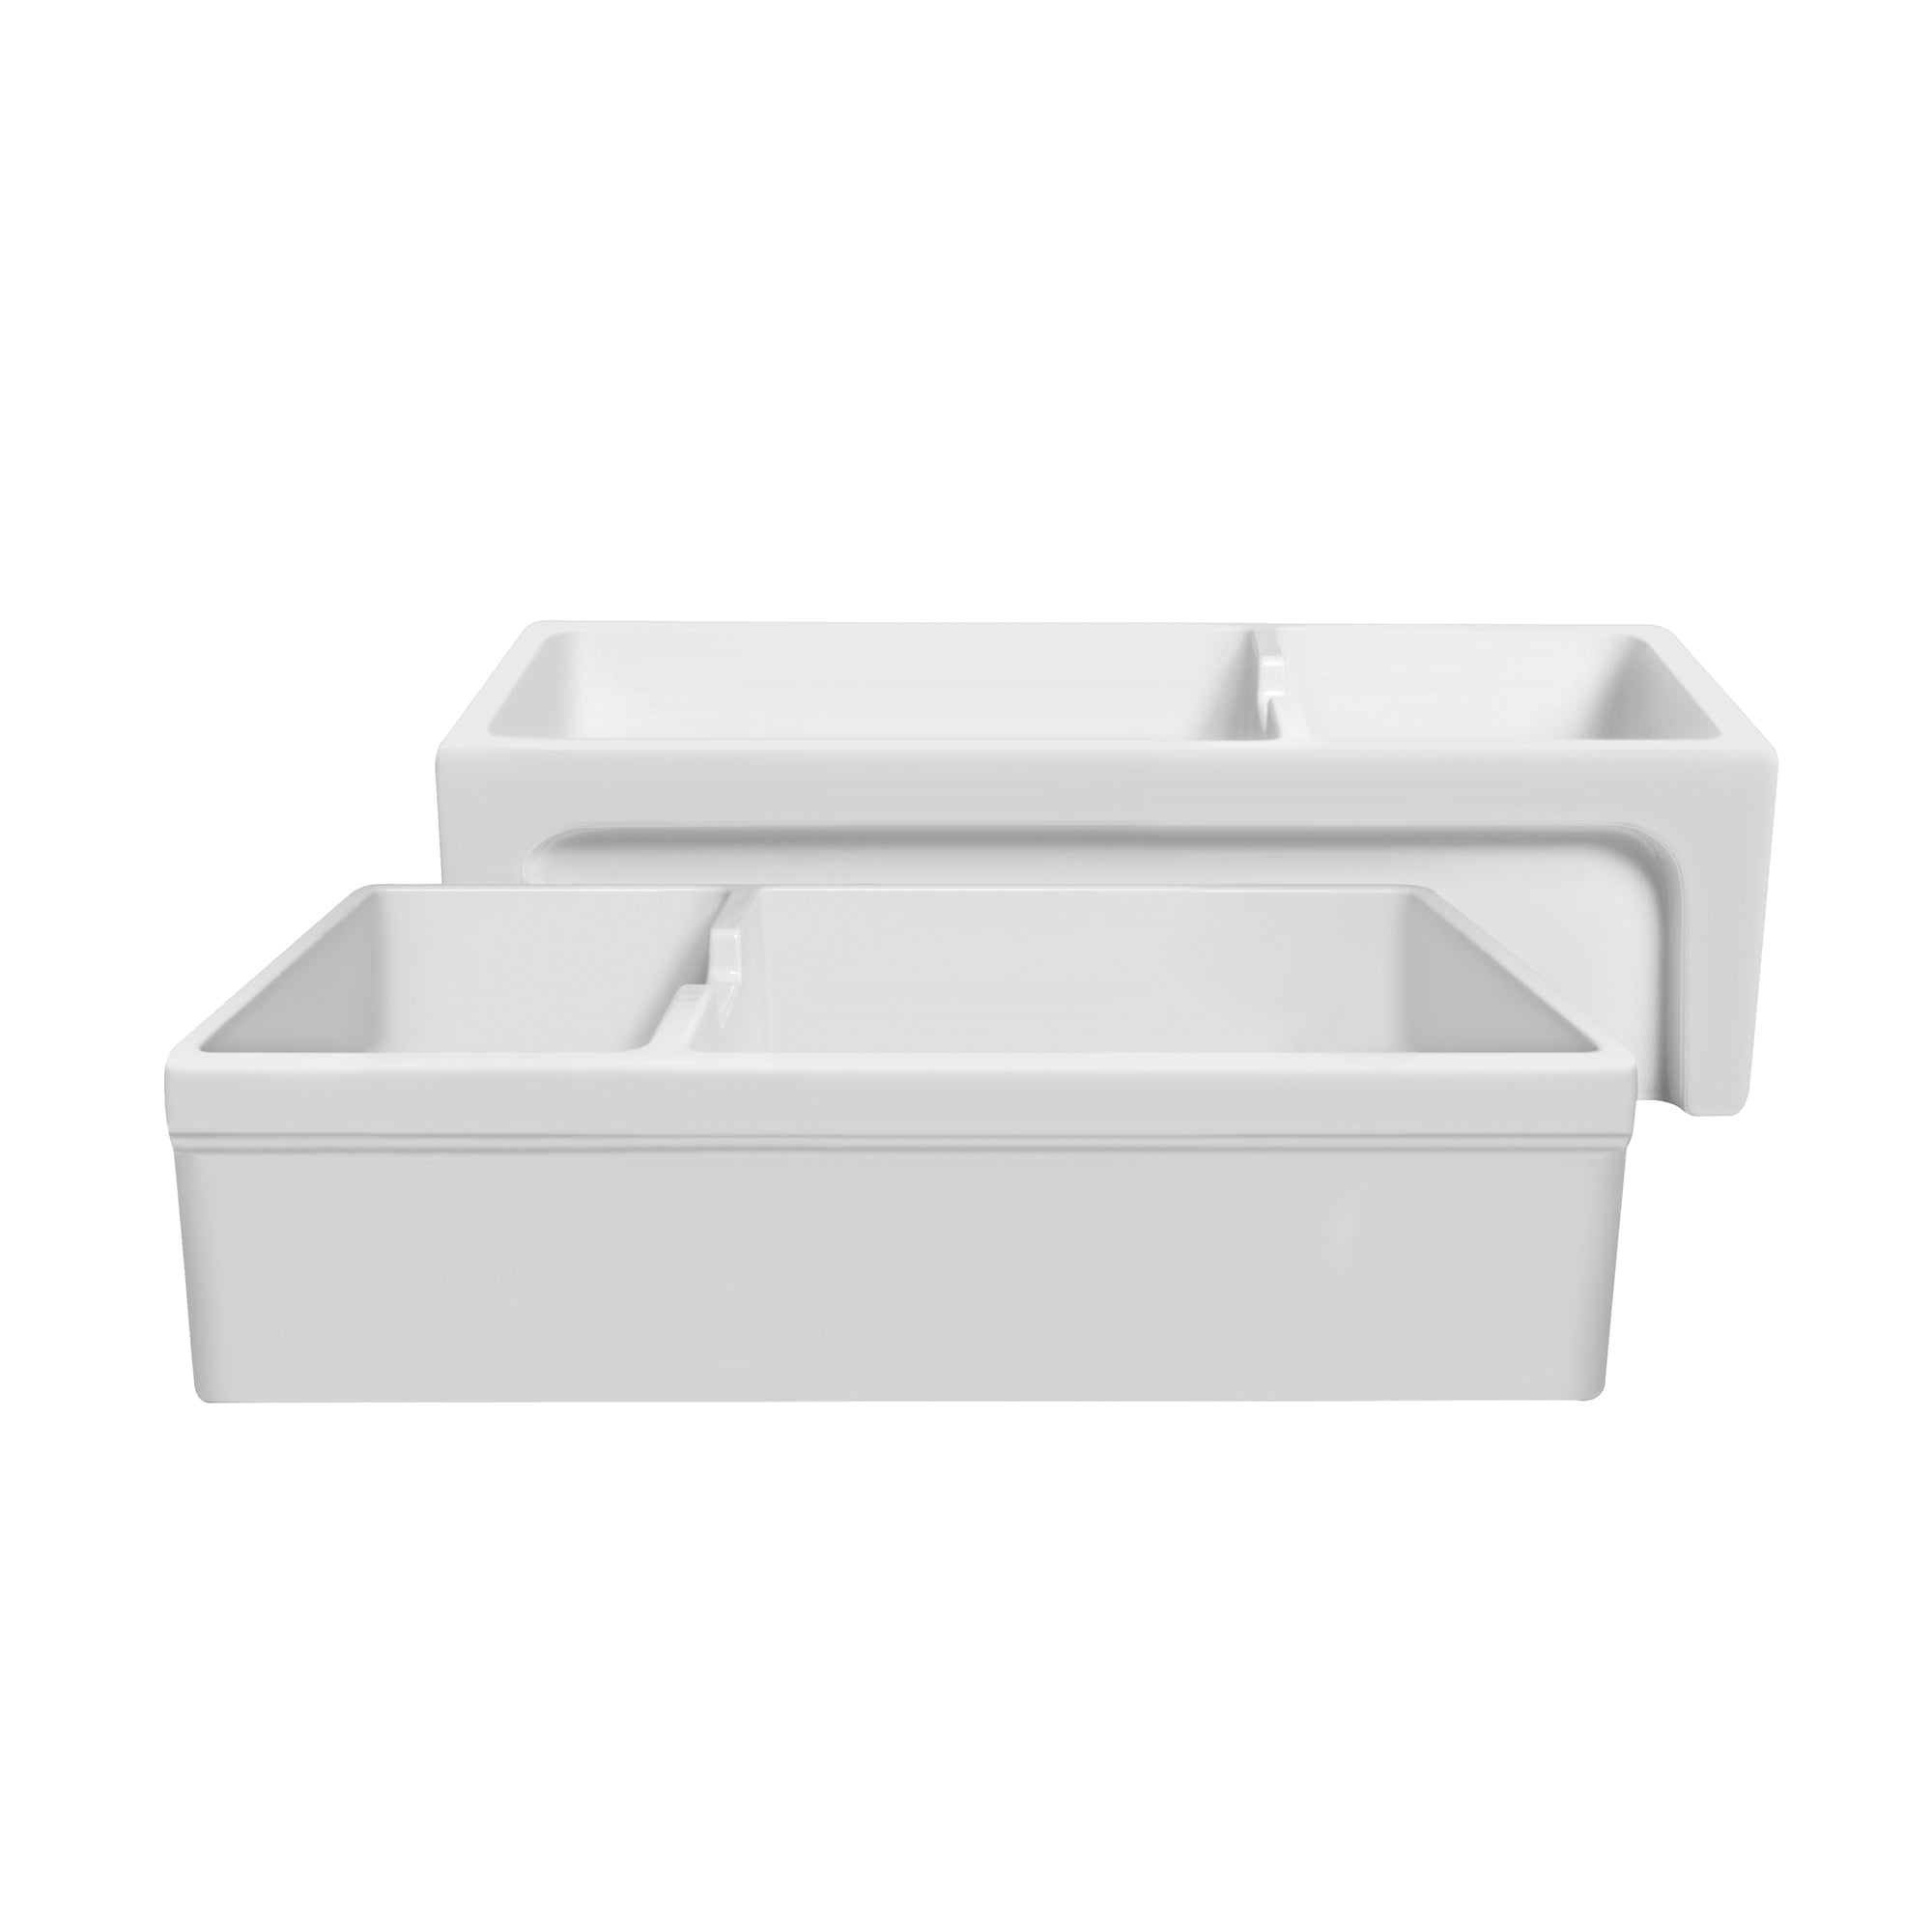 Glencove 42" large double bowl reversible fireclay sink with beveled front apron